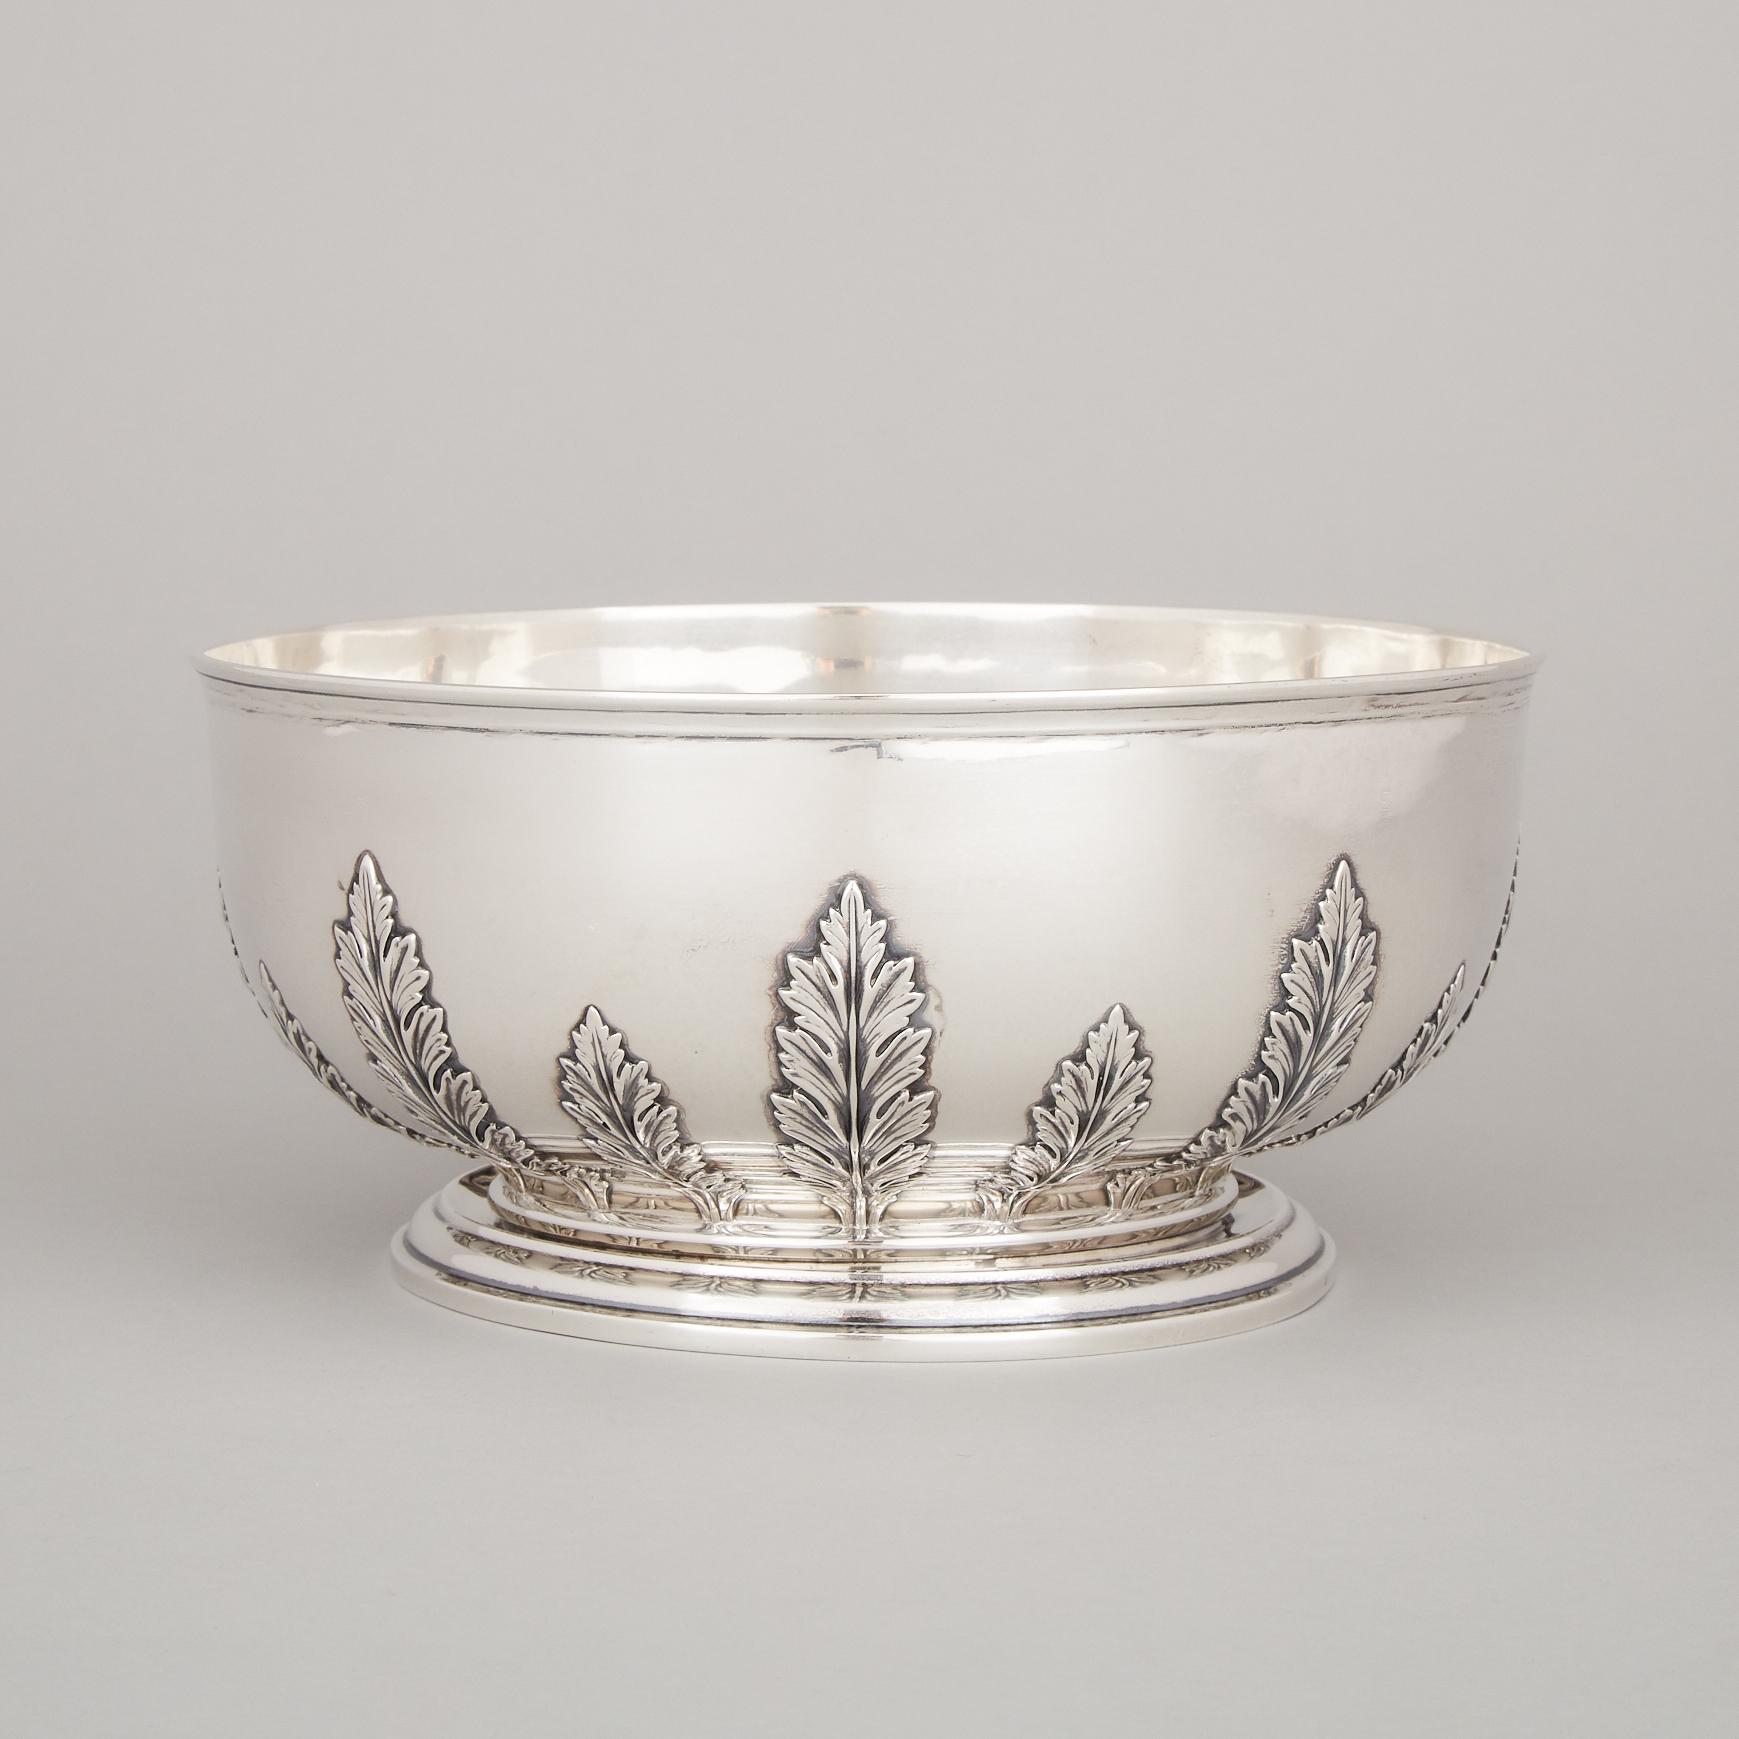 Canadian Silver Bowl, Henry Birks & Sons, Montreal, Que., c.1904-24